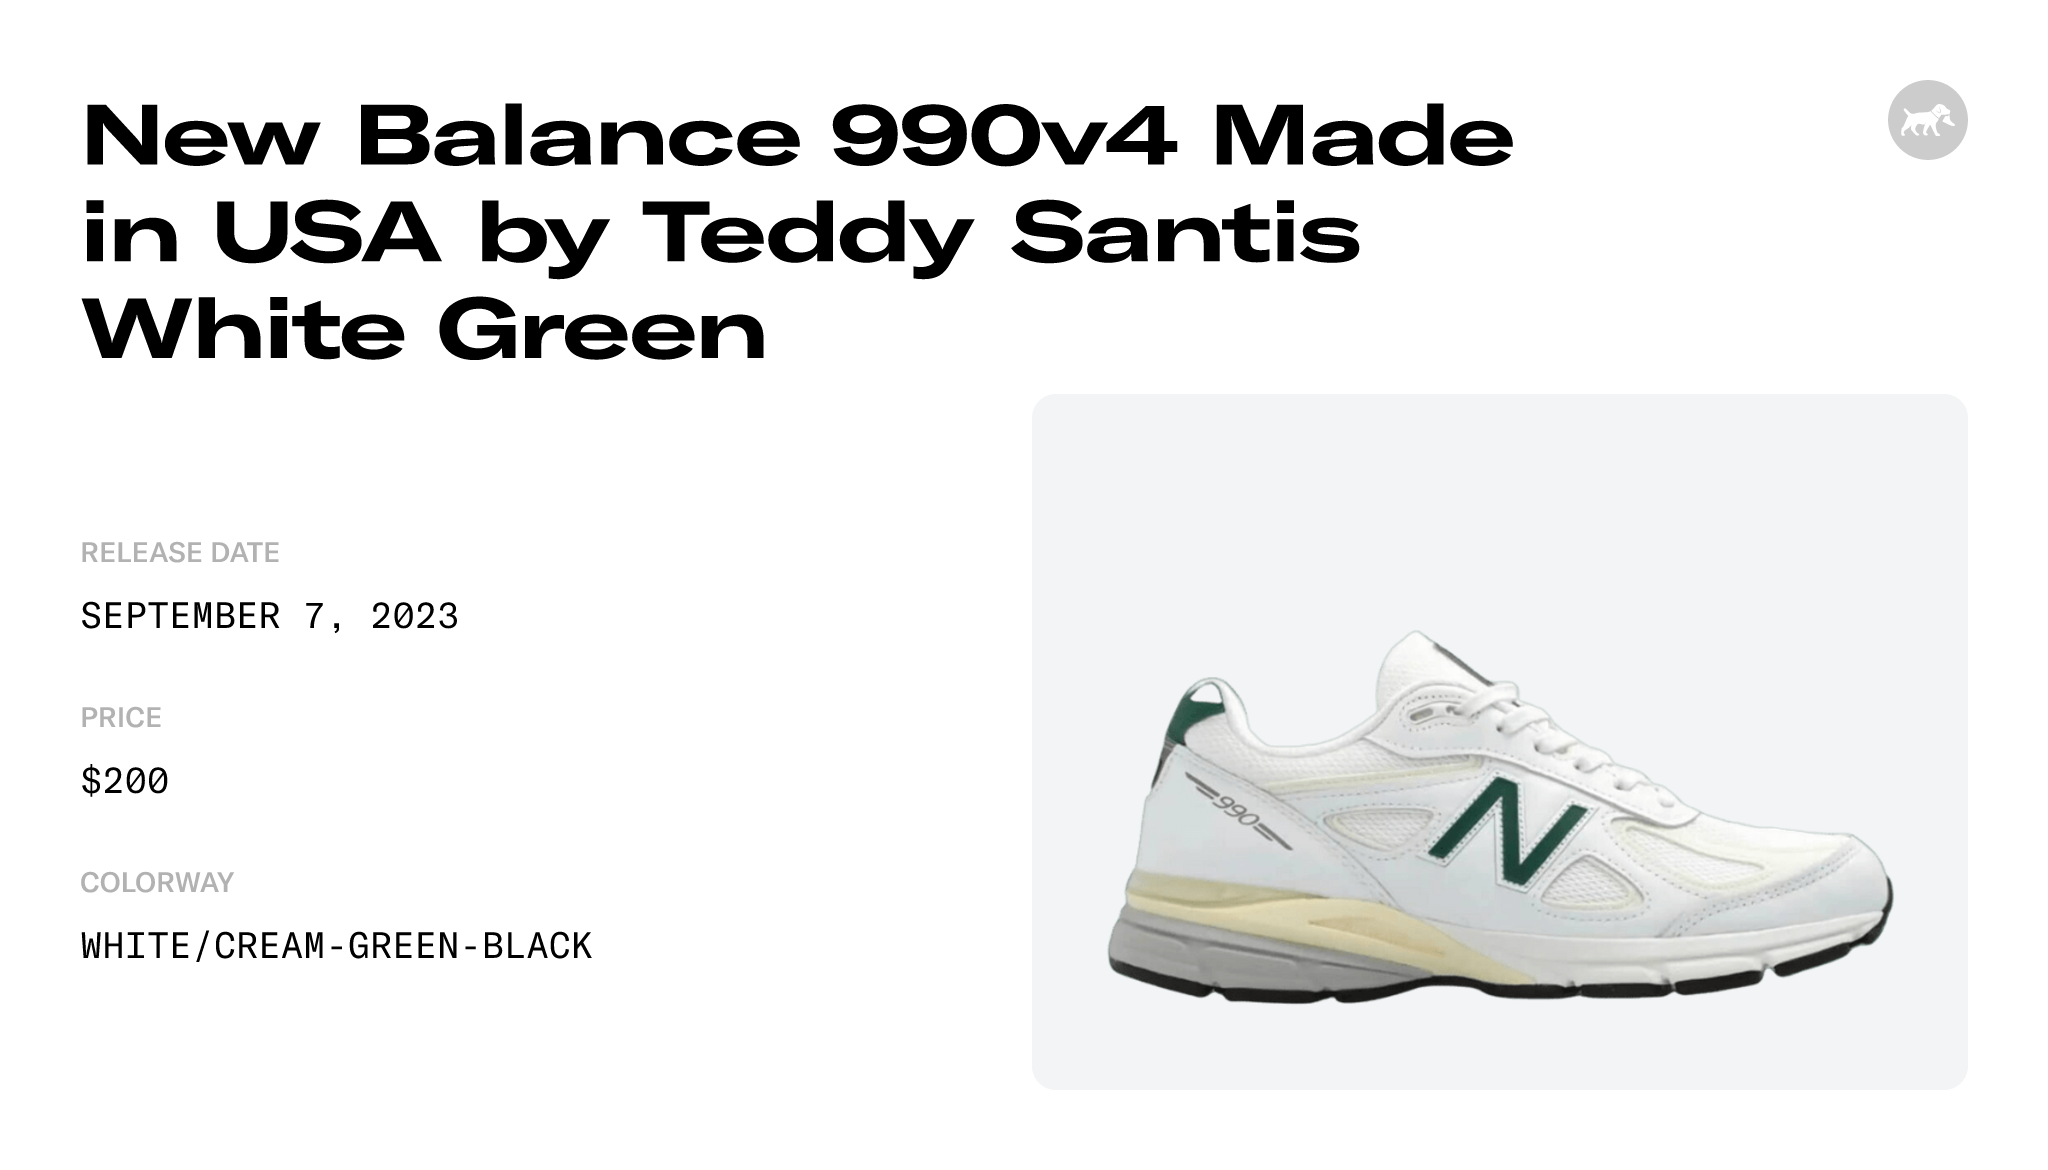 New Balance 990v4 Made in USA by Teddy Santis White Green